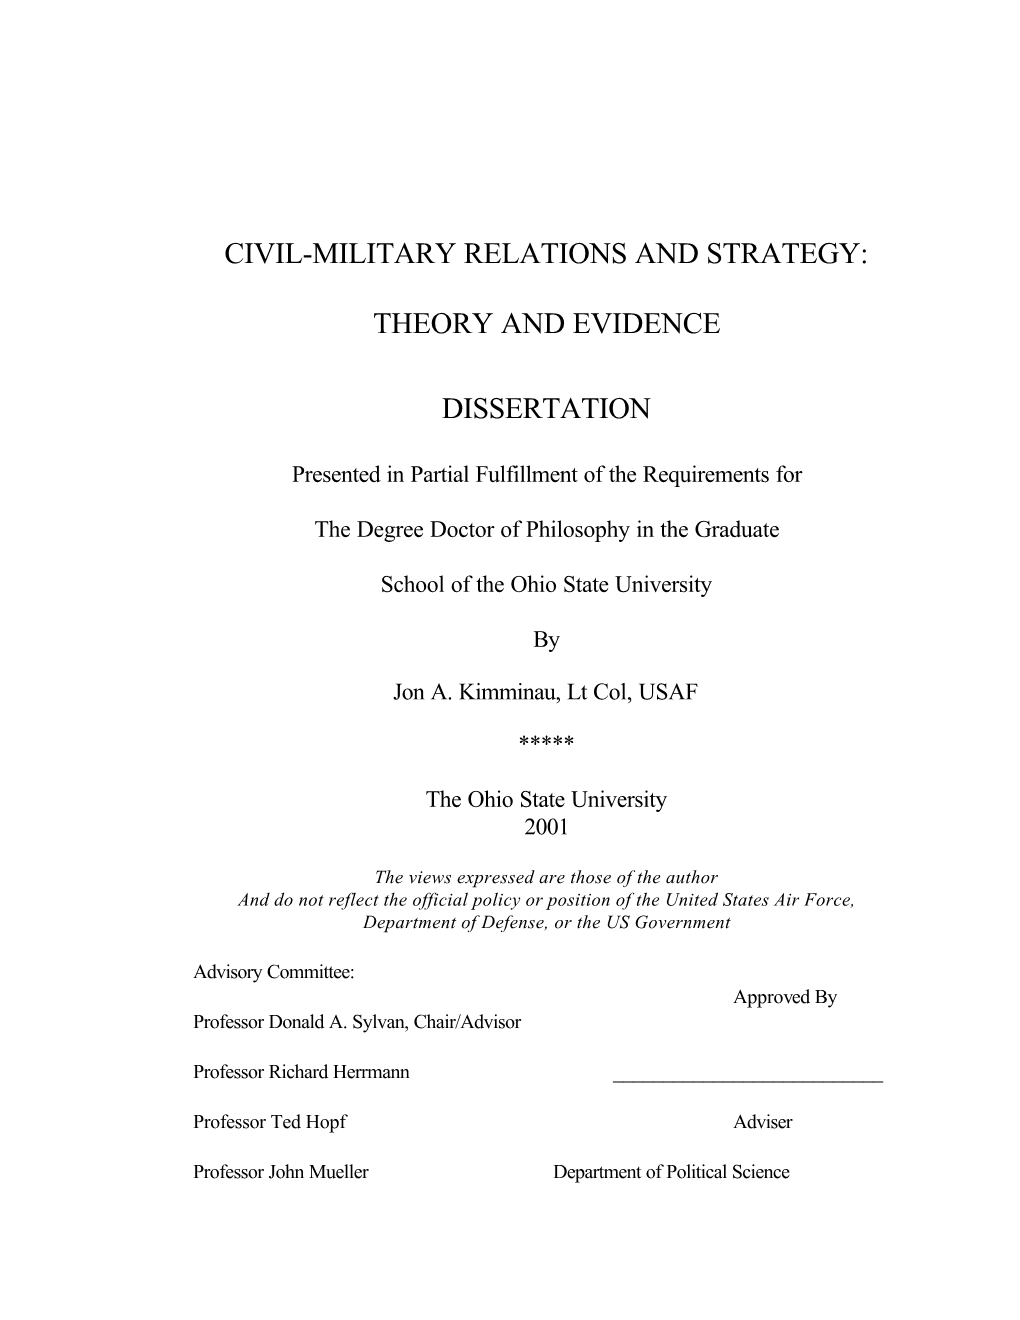 Civil-Military Relations and Strategy: Theory and Evidence Dissertation